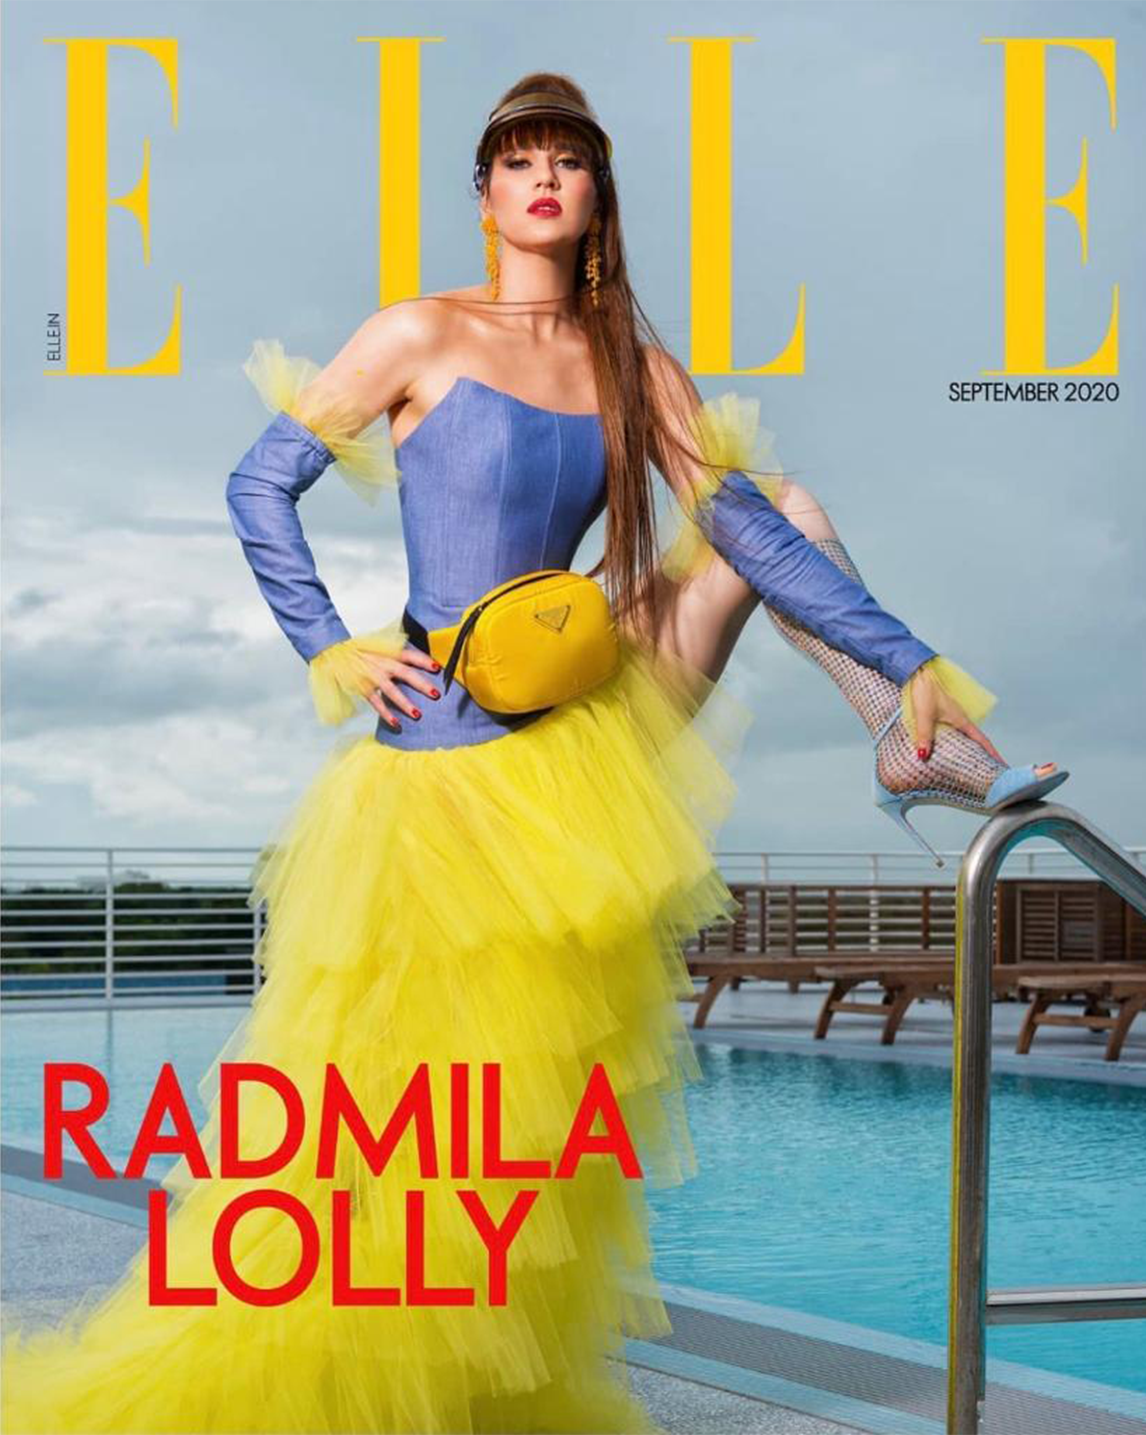 RADMILA LOLLY'S AMAZING PERFORMANCE AT THE FTX ARENA - Skope Entertainment  Inc